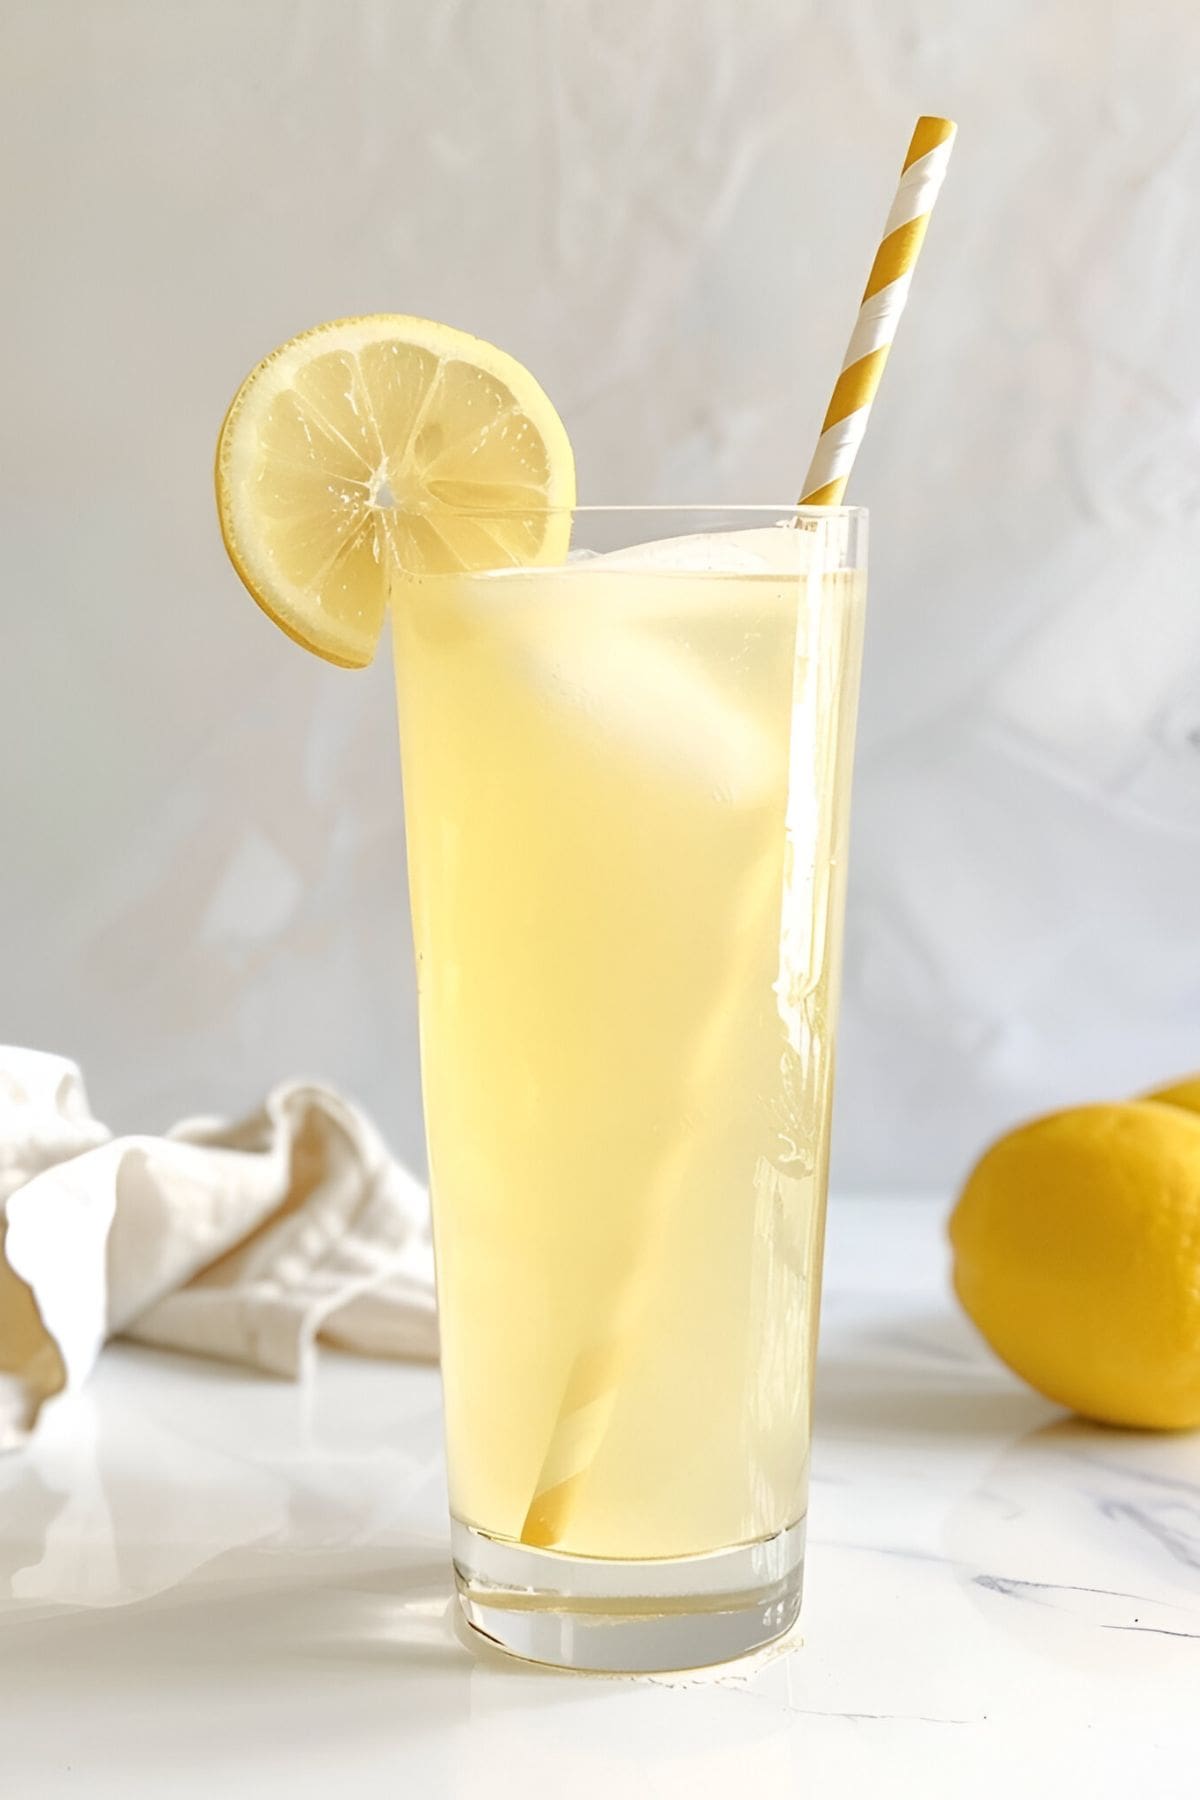 Chick-Fil-A Lemonade in a Tall Glass with Ice and a Wheel of Lemon for Garnish with a Striped Straw